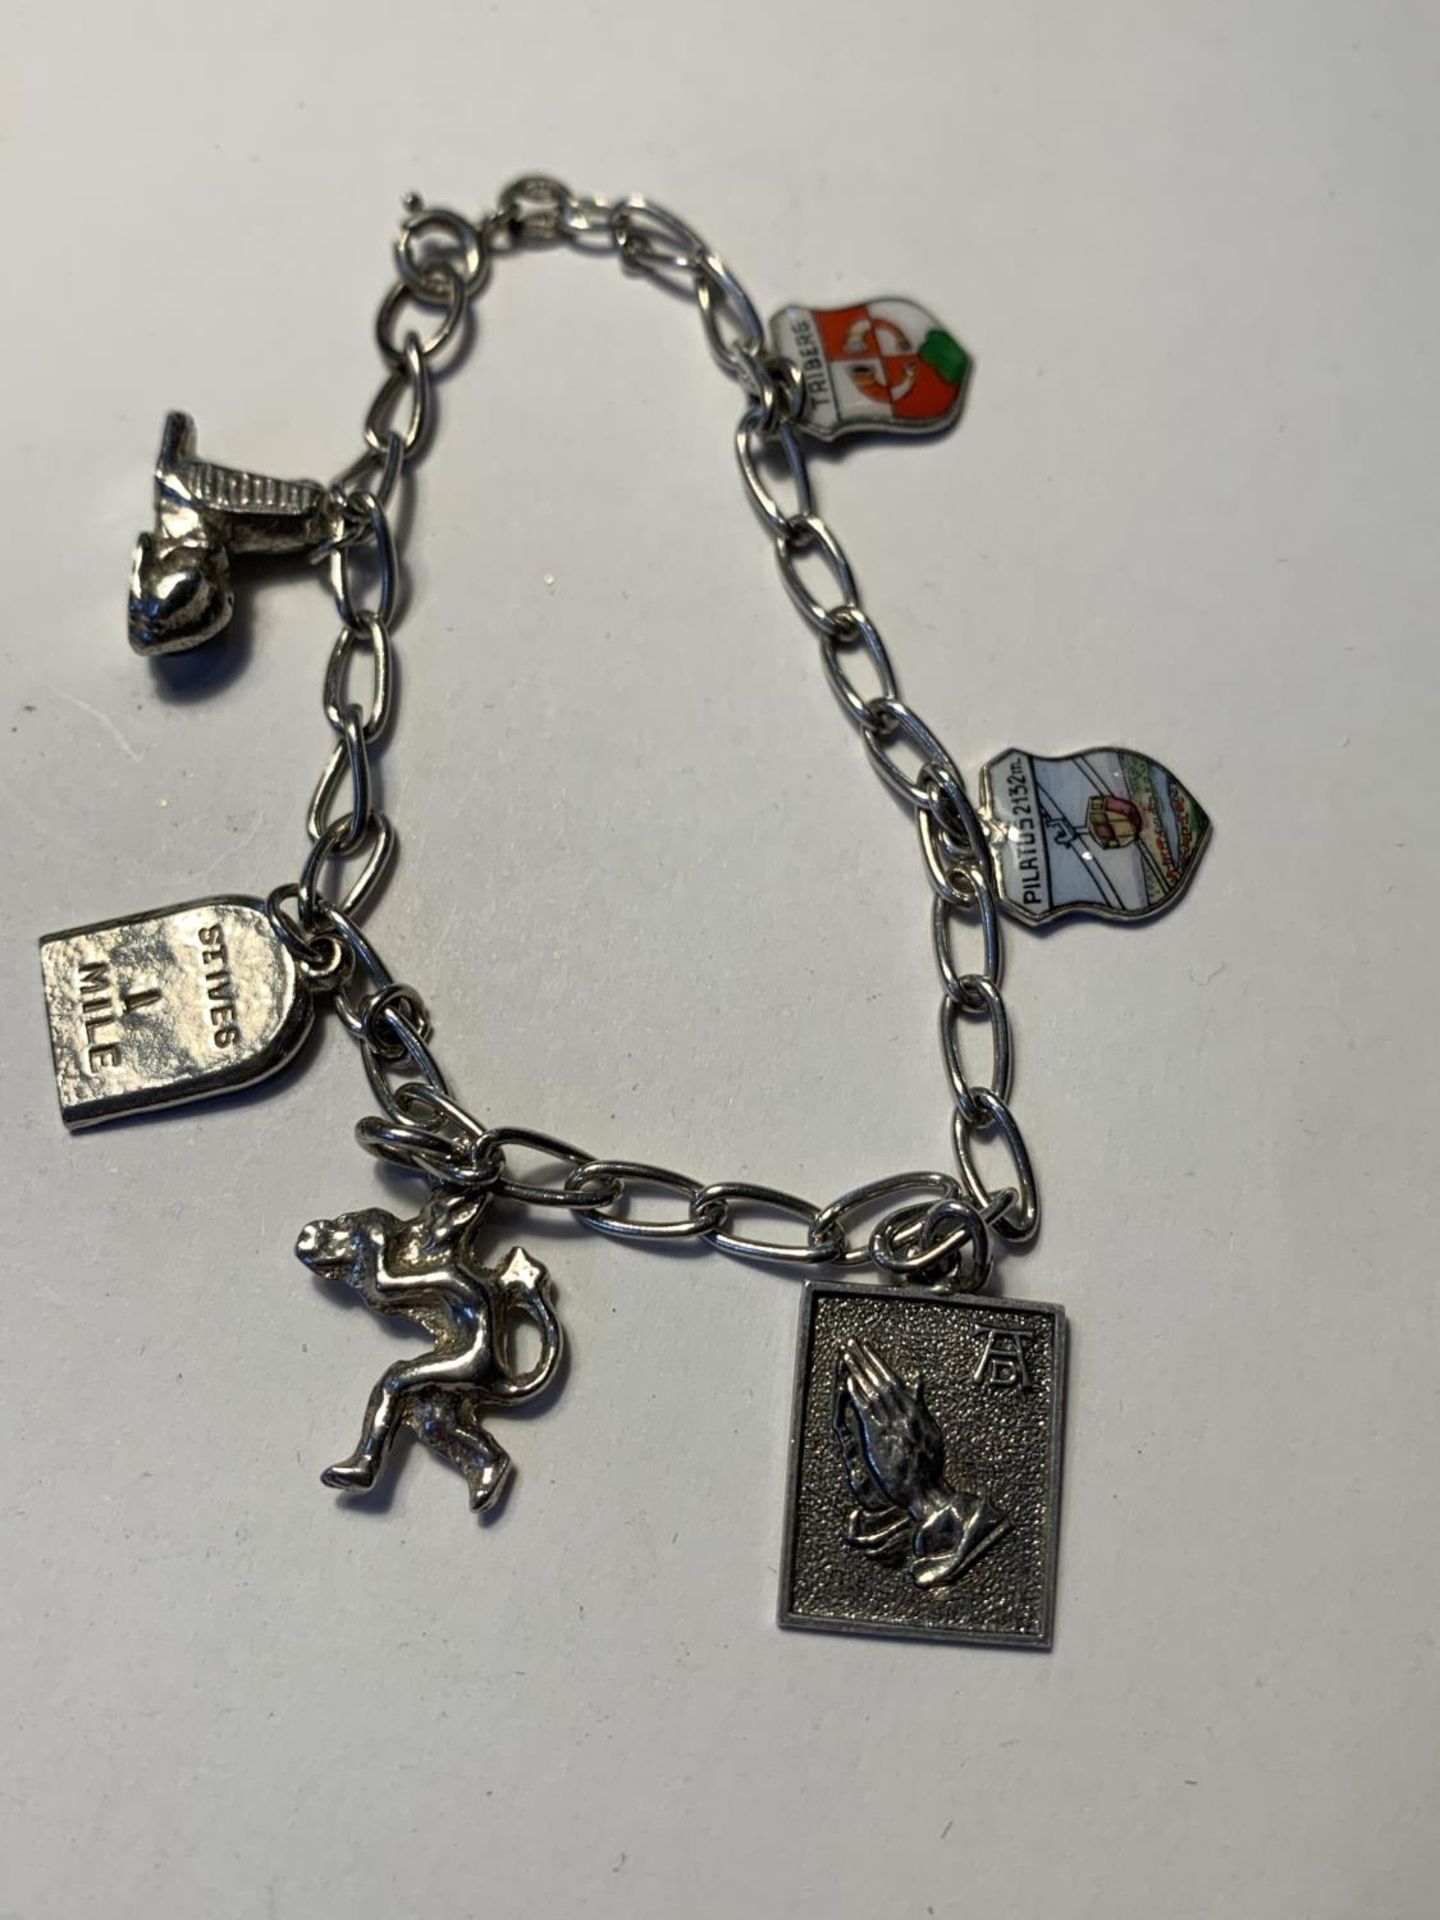 TWO SILVER BRACELETS WITH CHARMS - Image 3 of 3